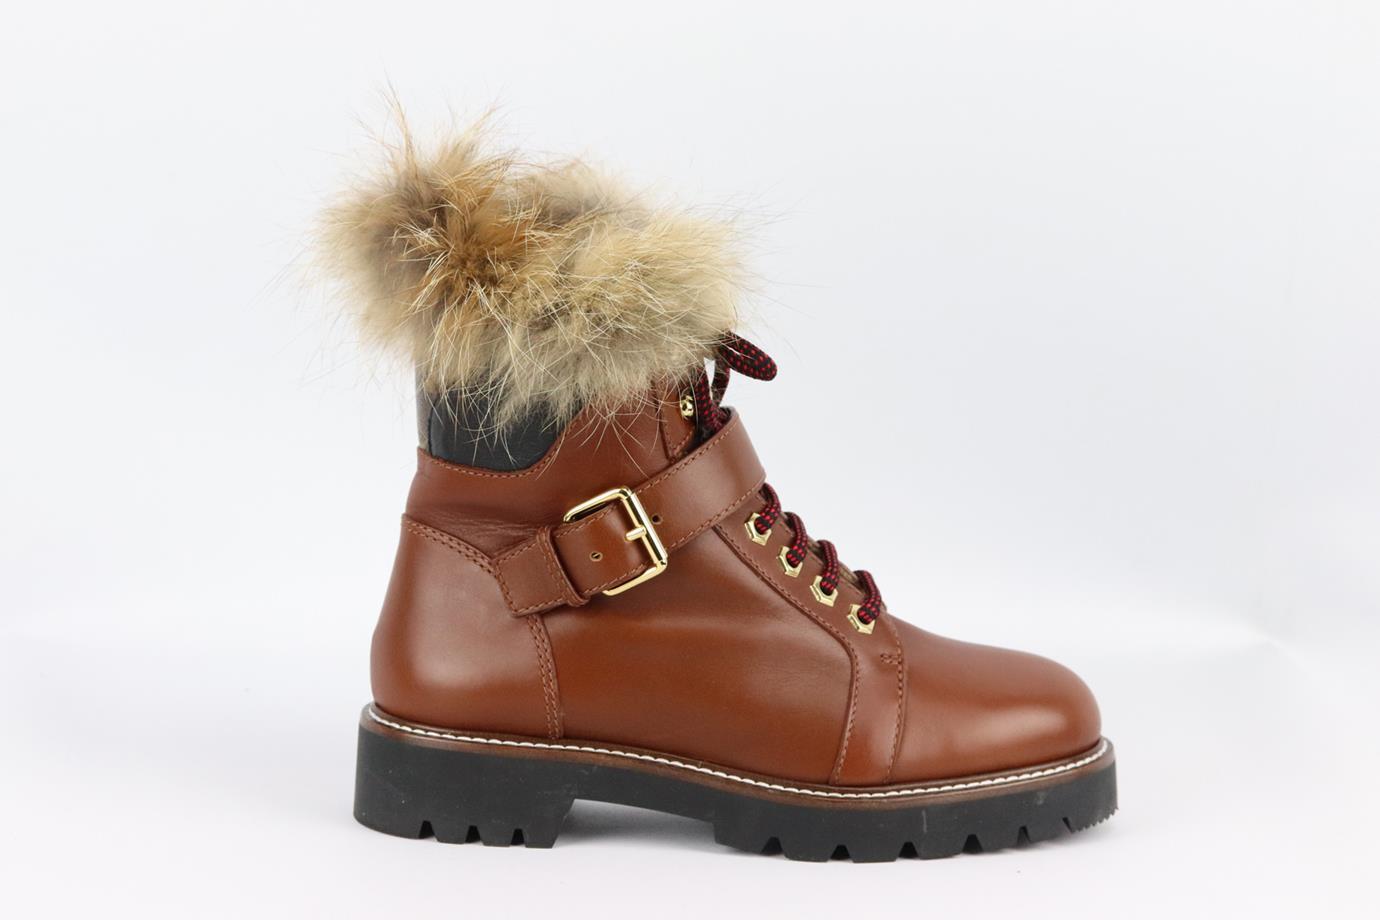 Louis Vuitton Territory Ranger fur trimmed leather ankle boots. Brown. Lace up fastening at front. Does not come with box or dustbag. Size: EU 38.5 (UK 5.5, US 8.5). Outersole: 10.5 in. Shaft: 6.4 in. Heel: 1.5 in. New without box
